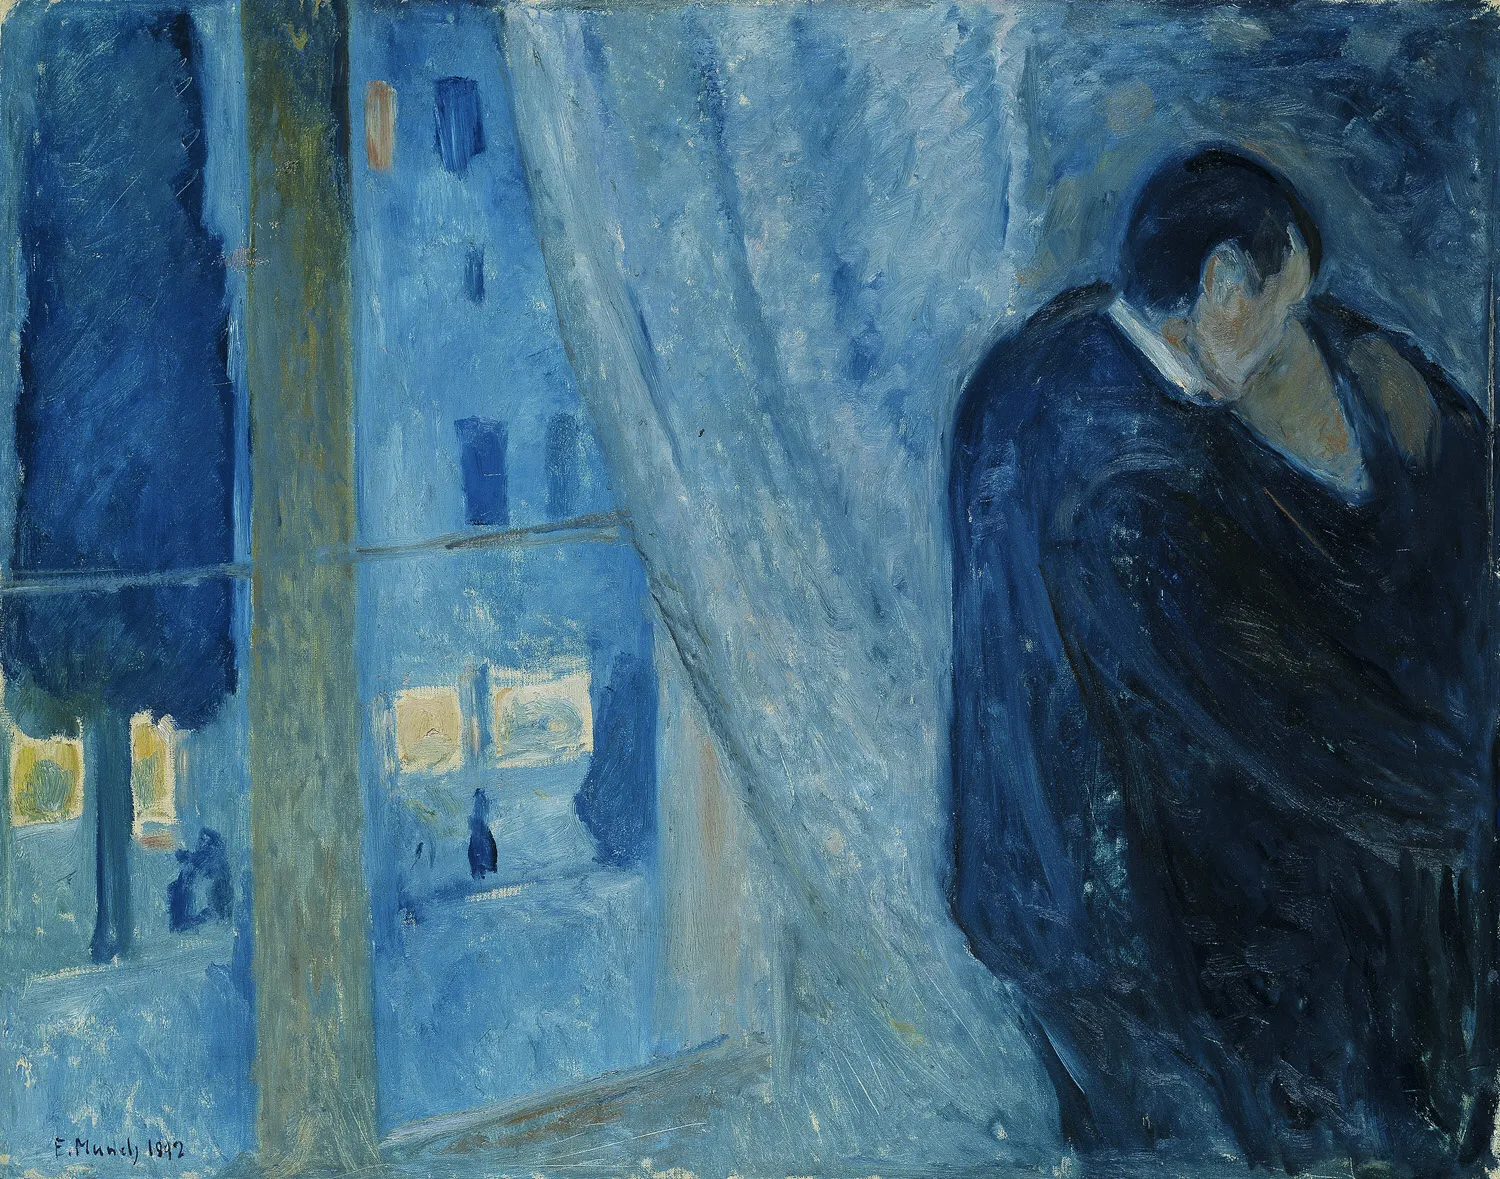 Edvard-Munch-Kiss-by-the-window-1892